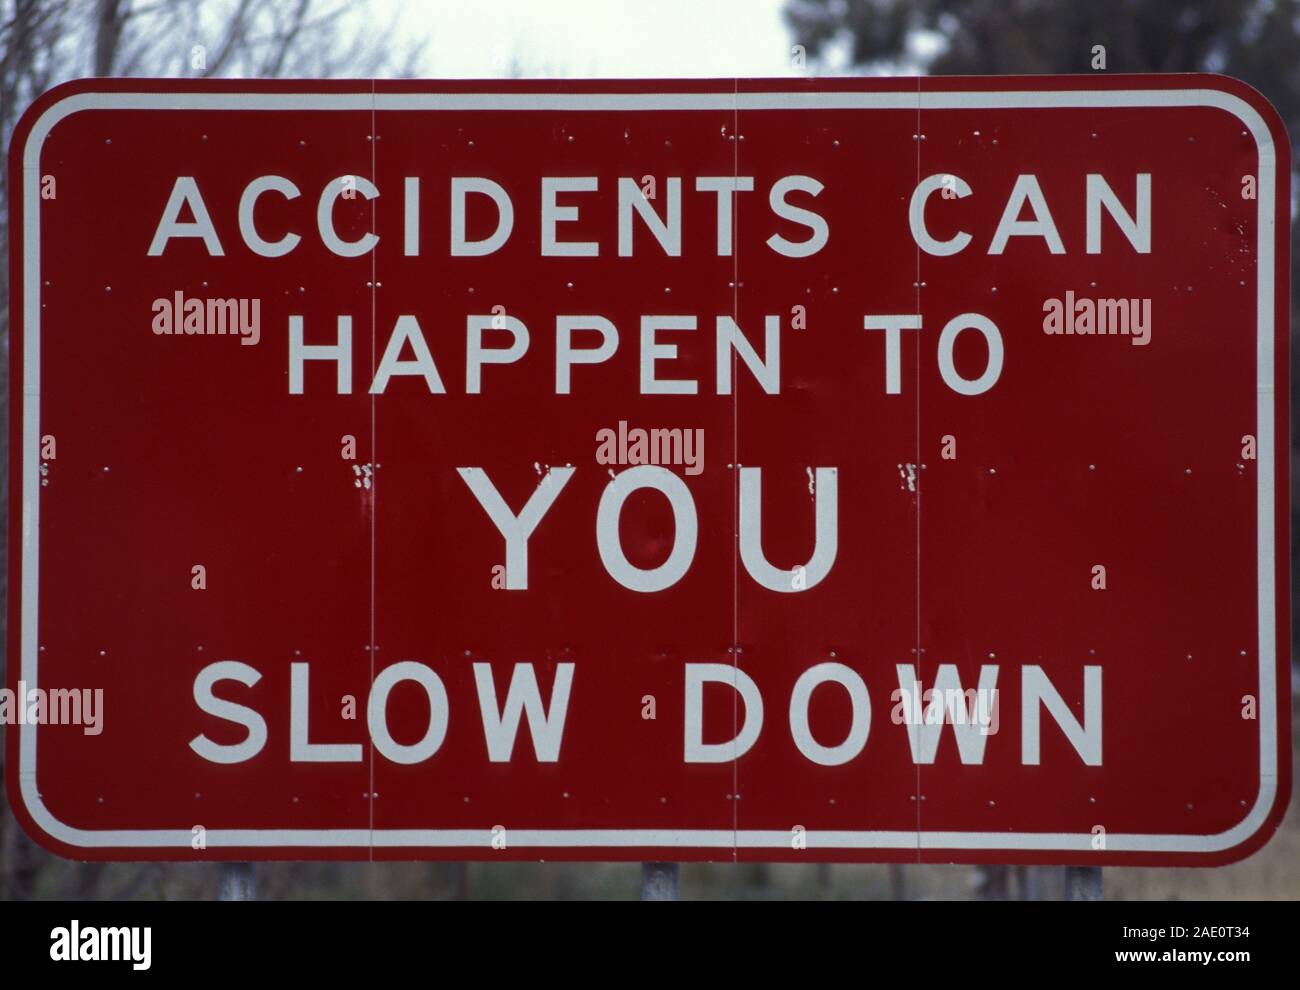 AUSTRALIAN ROAD SIGN 'ACCIDENTS CAN HAPPEN TO YOU SLOW DOWN' Stock Photo